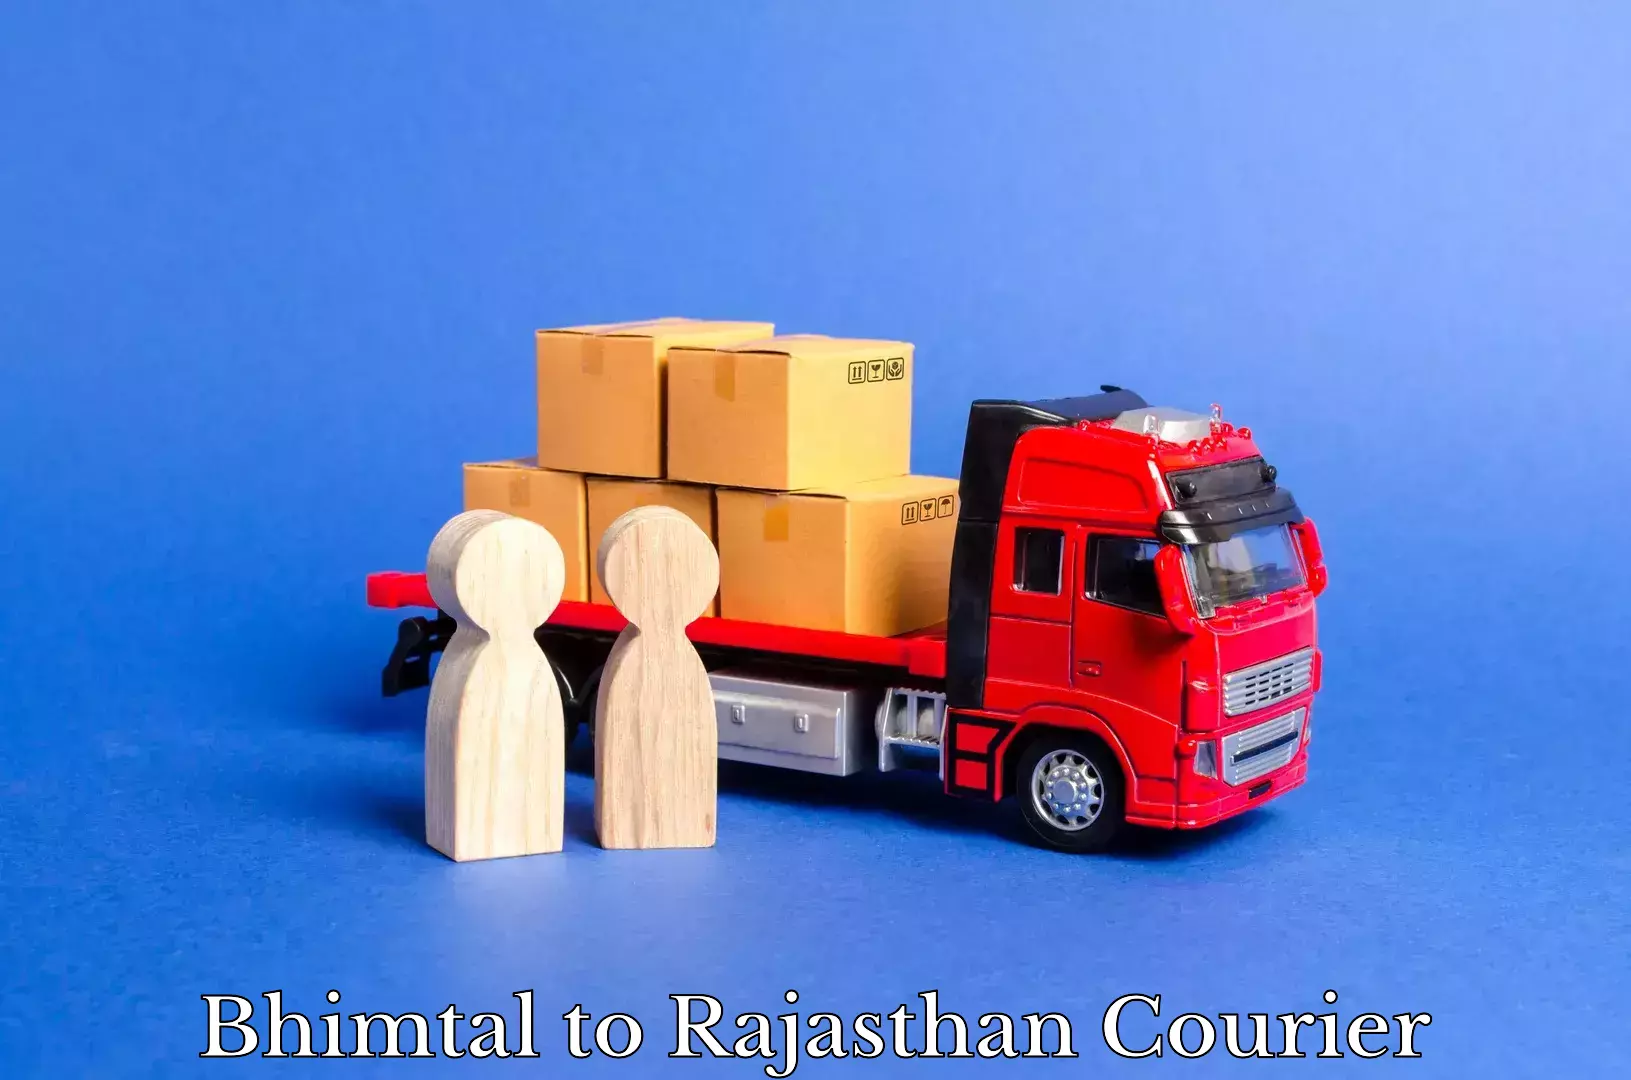 Subscription-based courier Bhimtal to Rajasthan